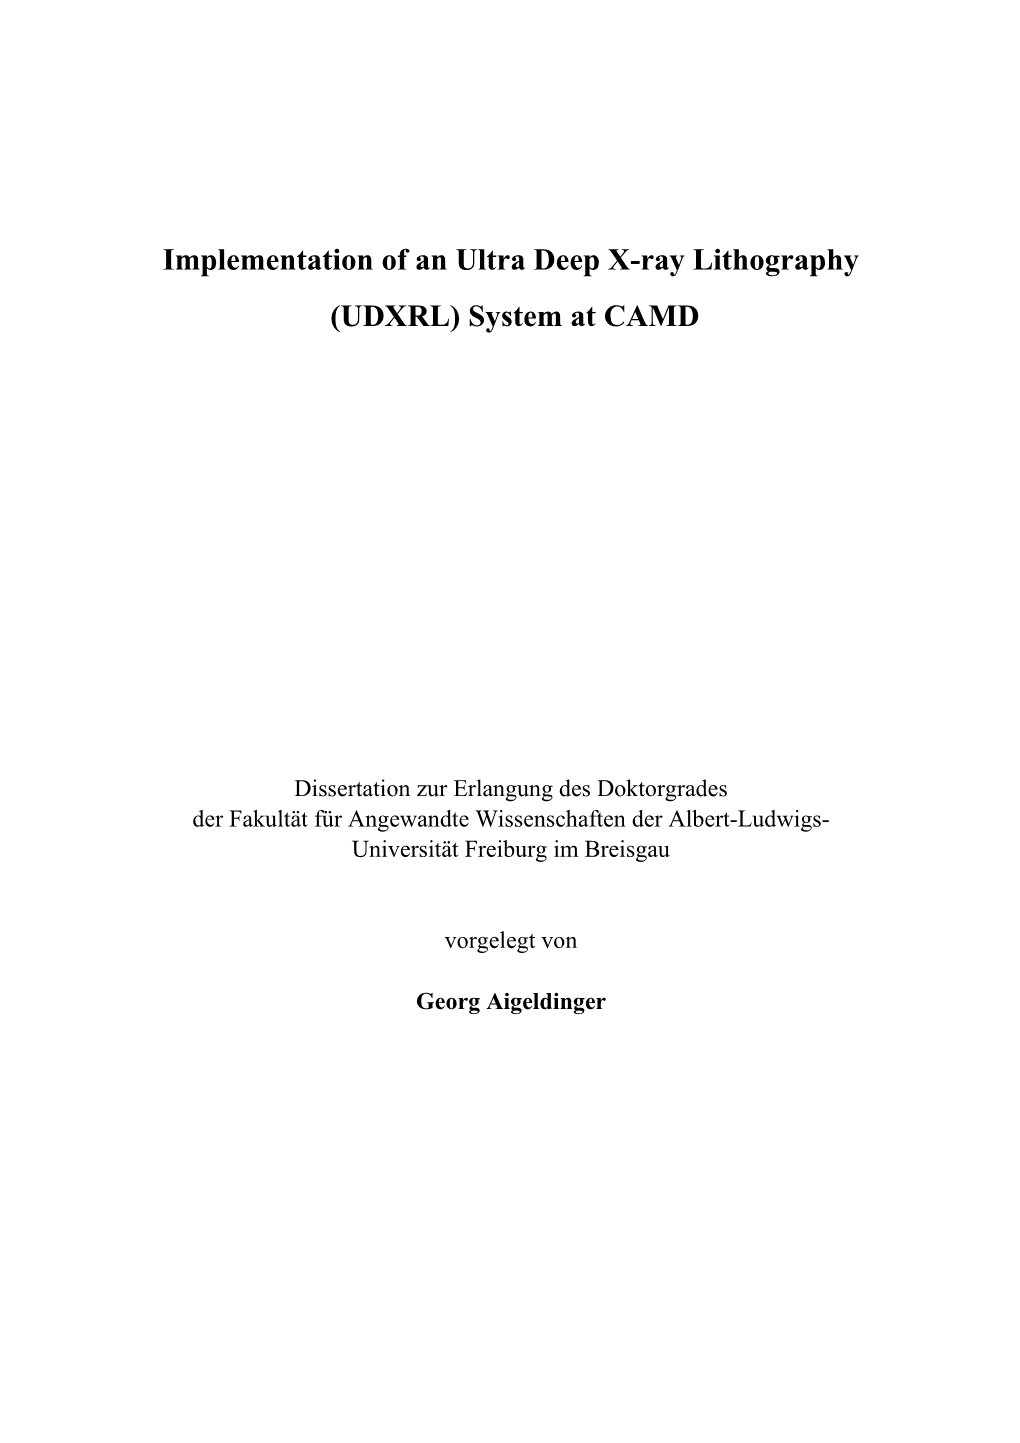 Implementation of an Ultra Deep X-Ray Lithography (UDXRL)